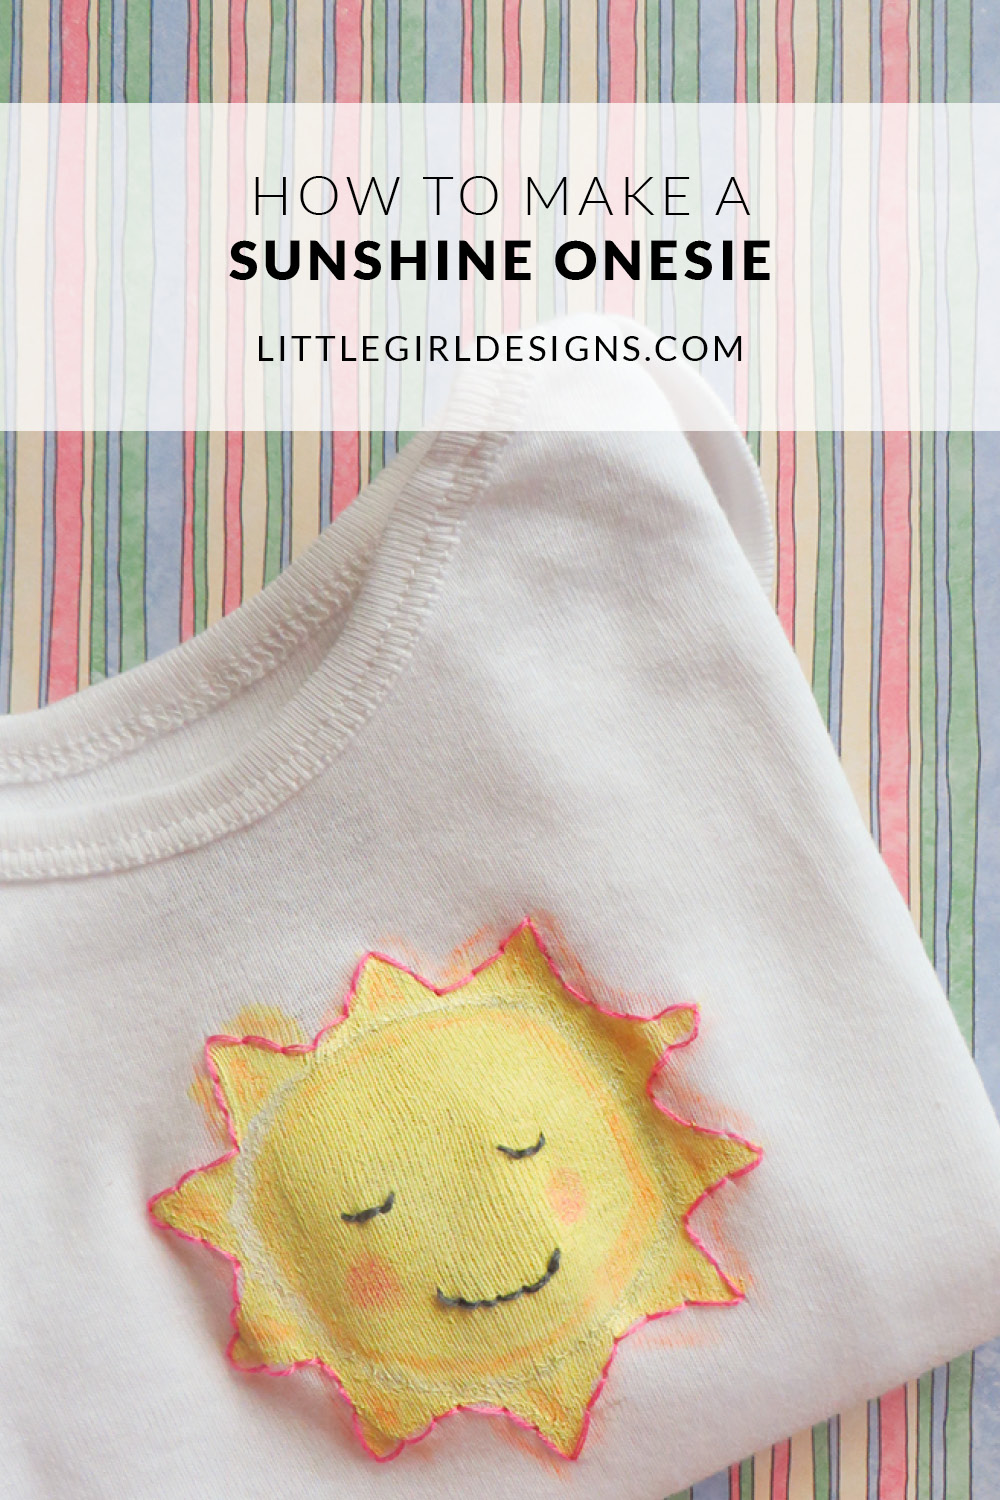 Use fabric paint, fabric markers, and embroidery floss to create a one-of-a-kind sunshine onesie for your little one. This also makes a great gift for a baby shower!